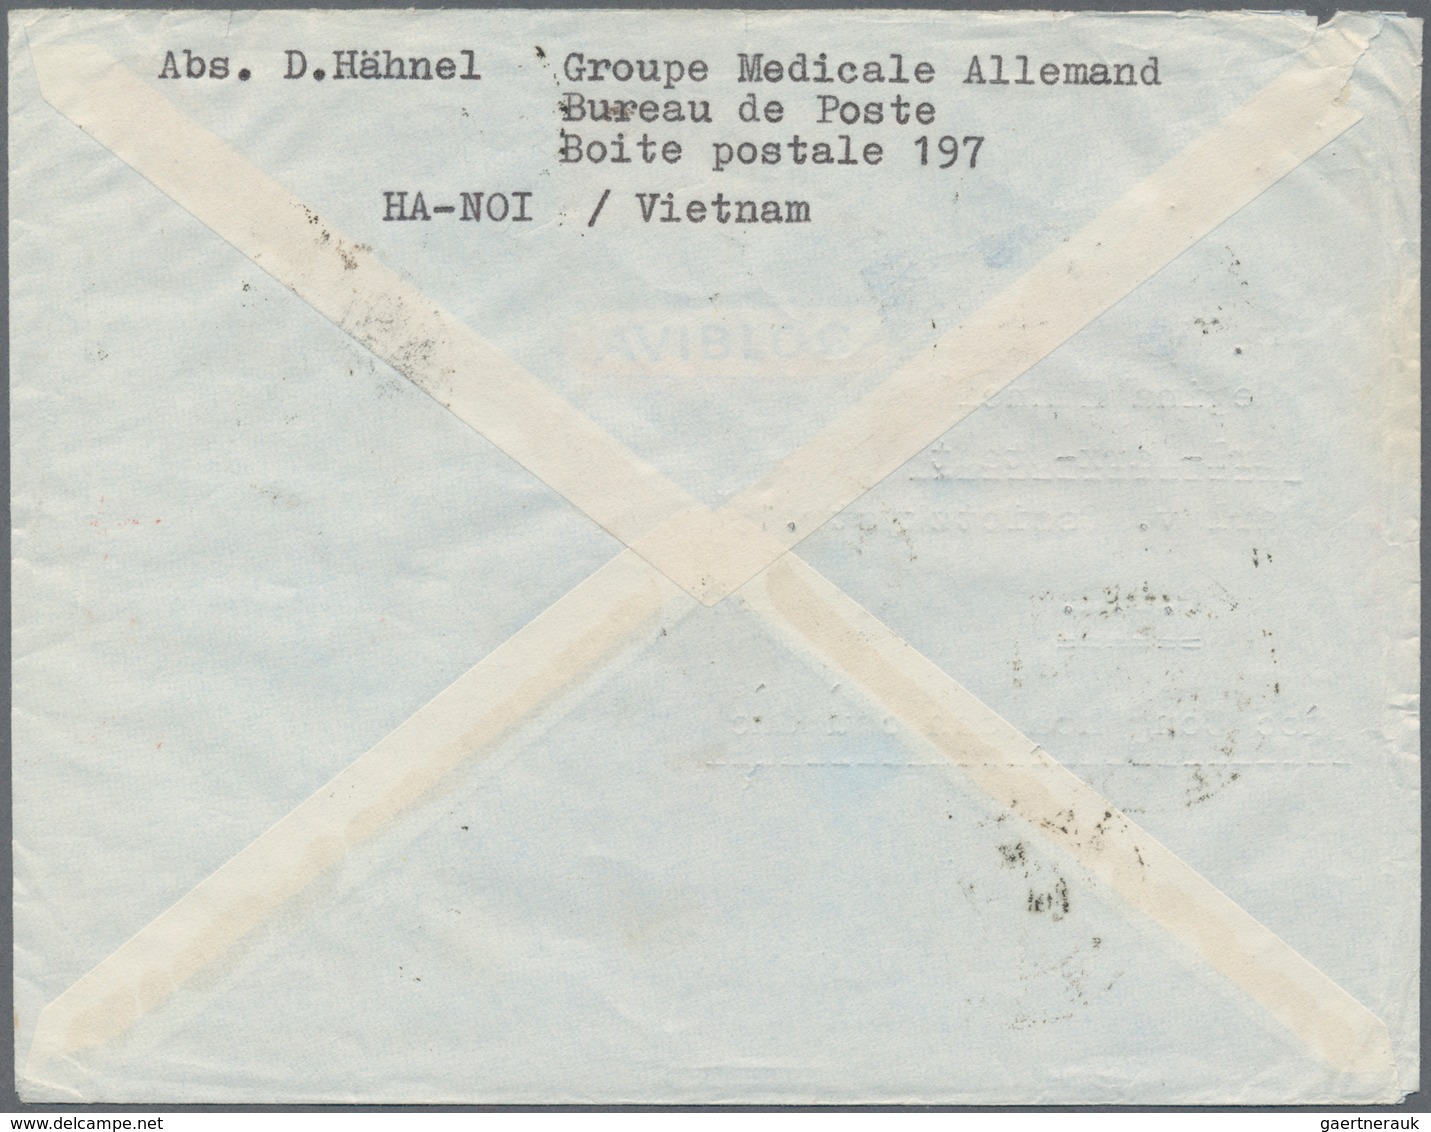 Vietnam-Nord (1945-1975): 1956, Airmail Cover Addressed To Karl-Marx-Stadt, East Germany, Bearing Th - Vietnam